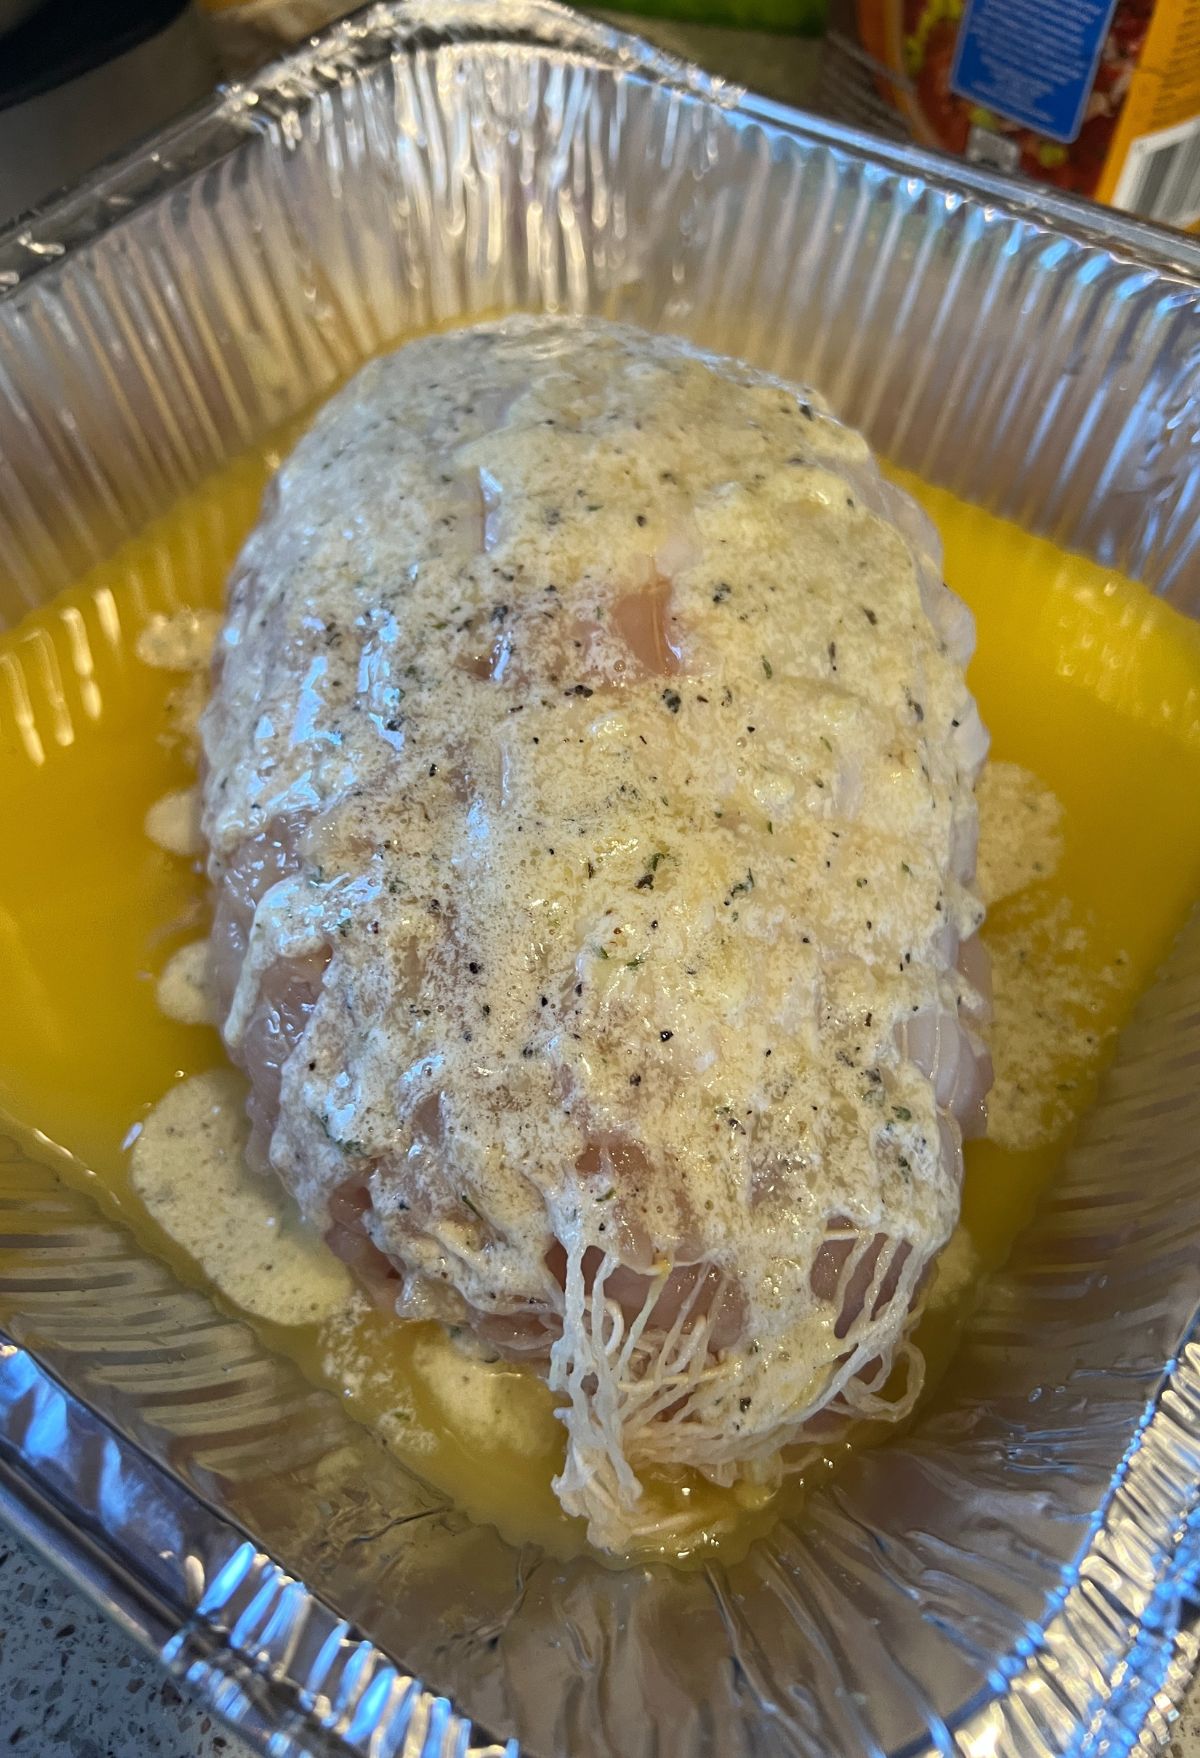 A chicken breast covered in sauce in a foil pan.